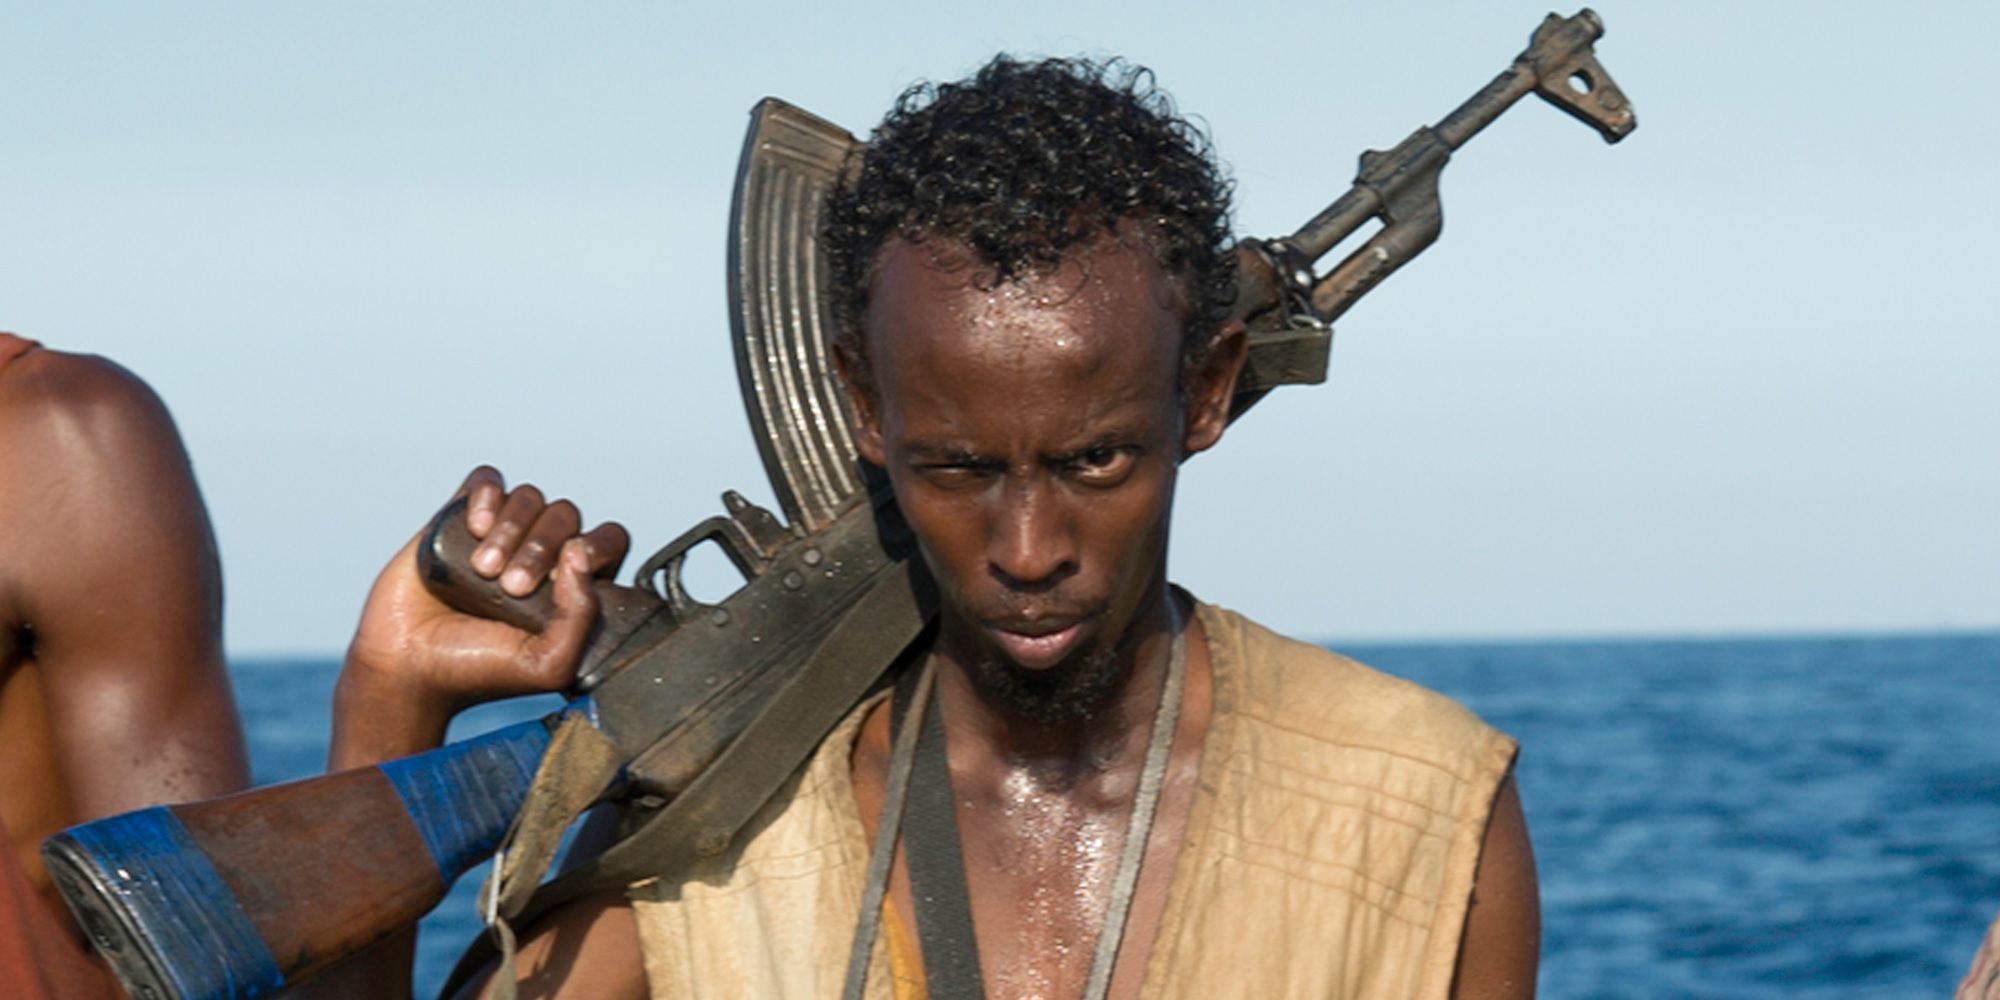 Barkhad Abdi in Captain Phillips holding an AK-47